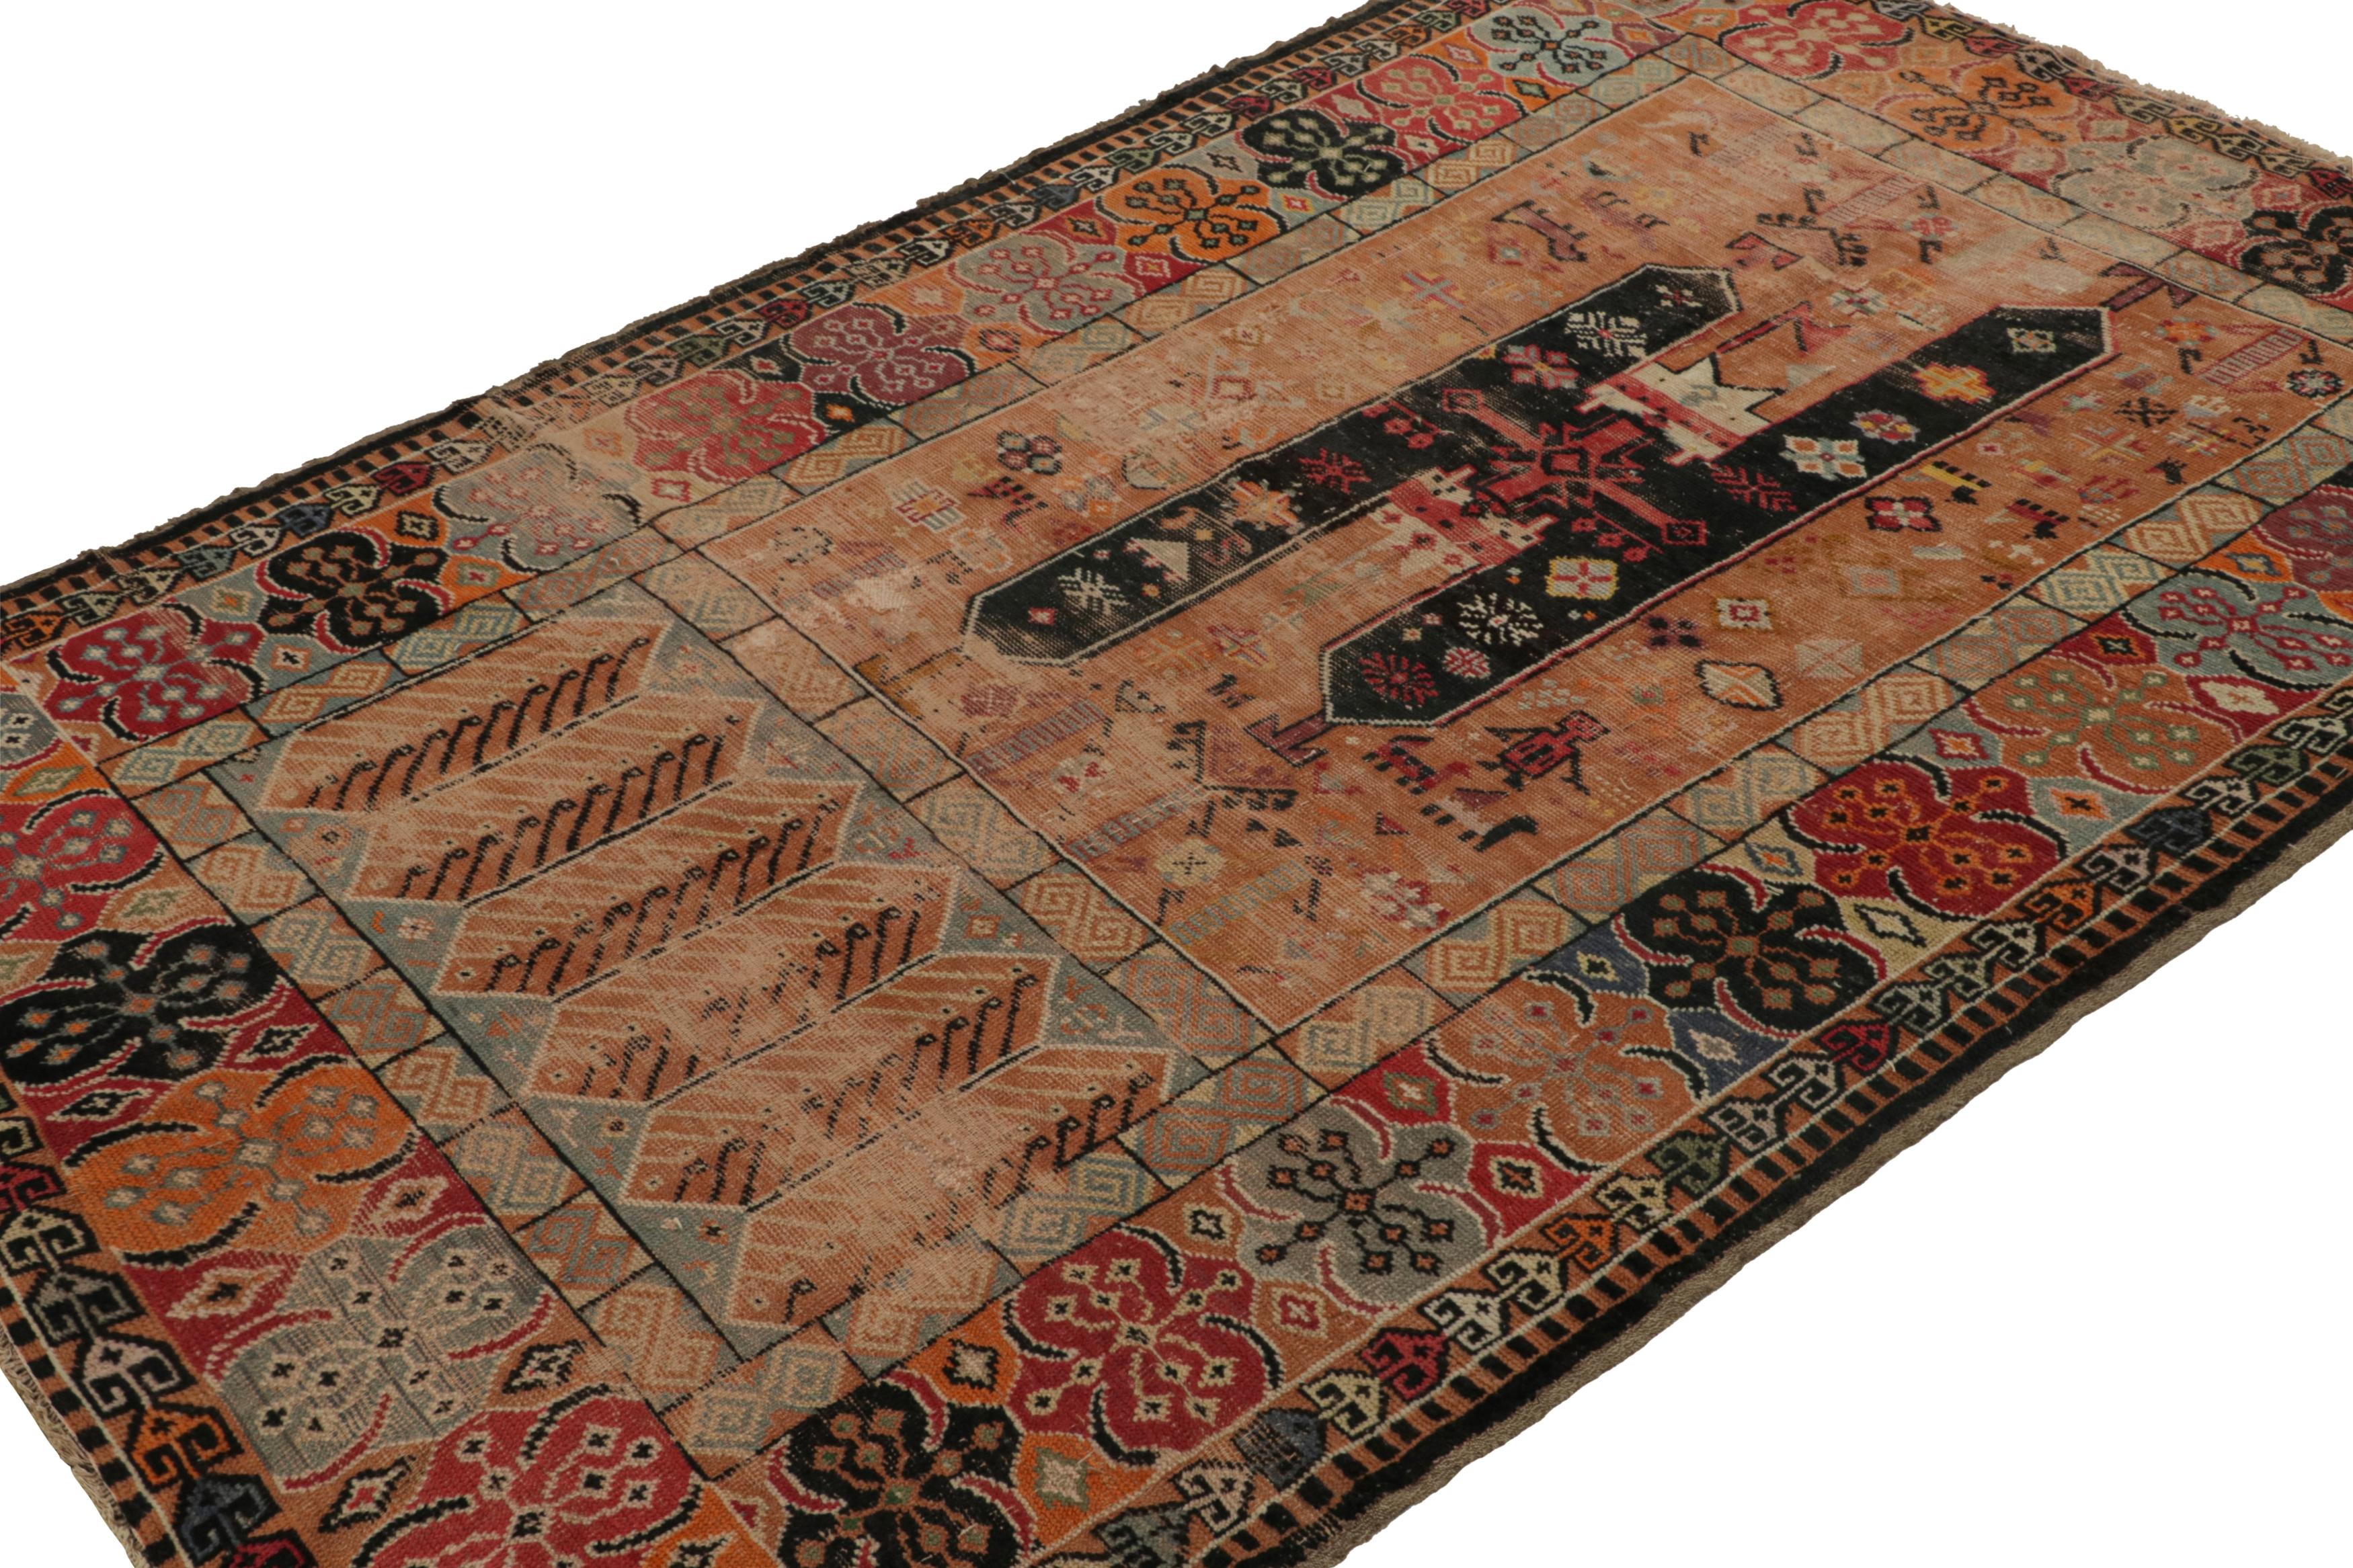 Hand-knotted in wool circa 1890-1900, this 6x9 antique European rug is a rare turn-of-the-century piece, believed to be of Irish or possibly English provenance. 

On the Design:

Admirers of the craft may note an inspiration from primitivist